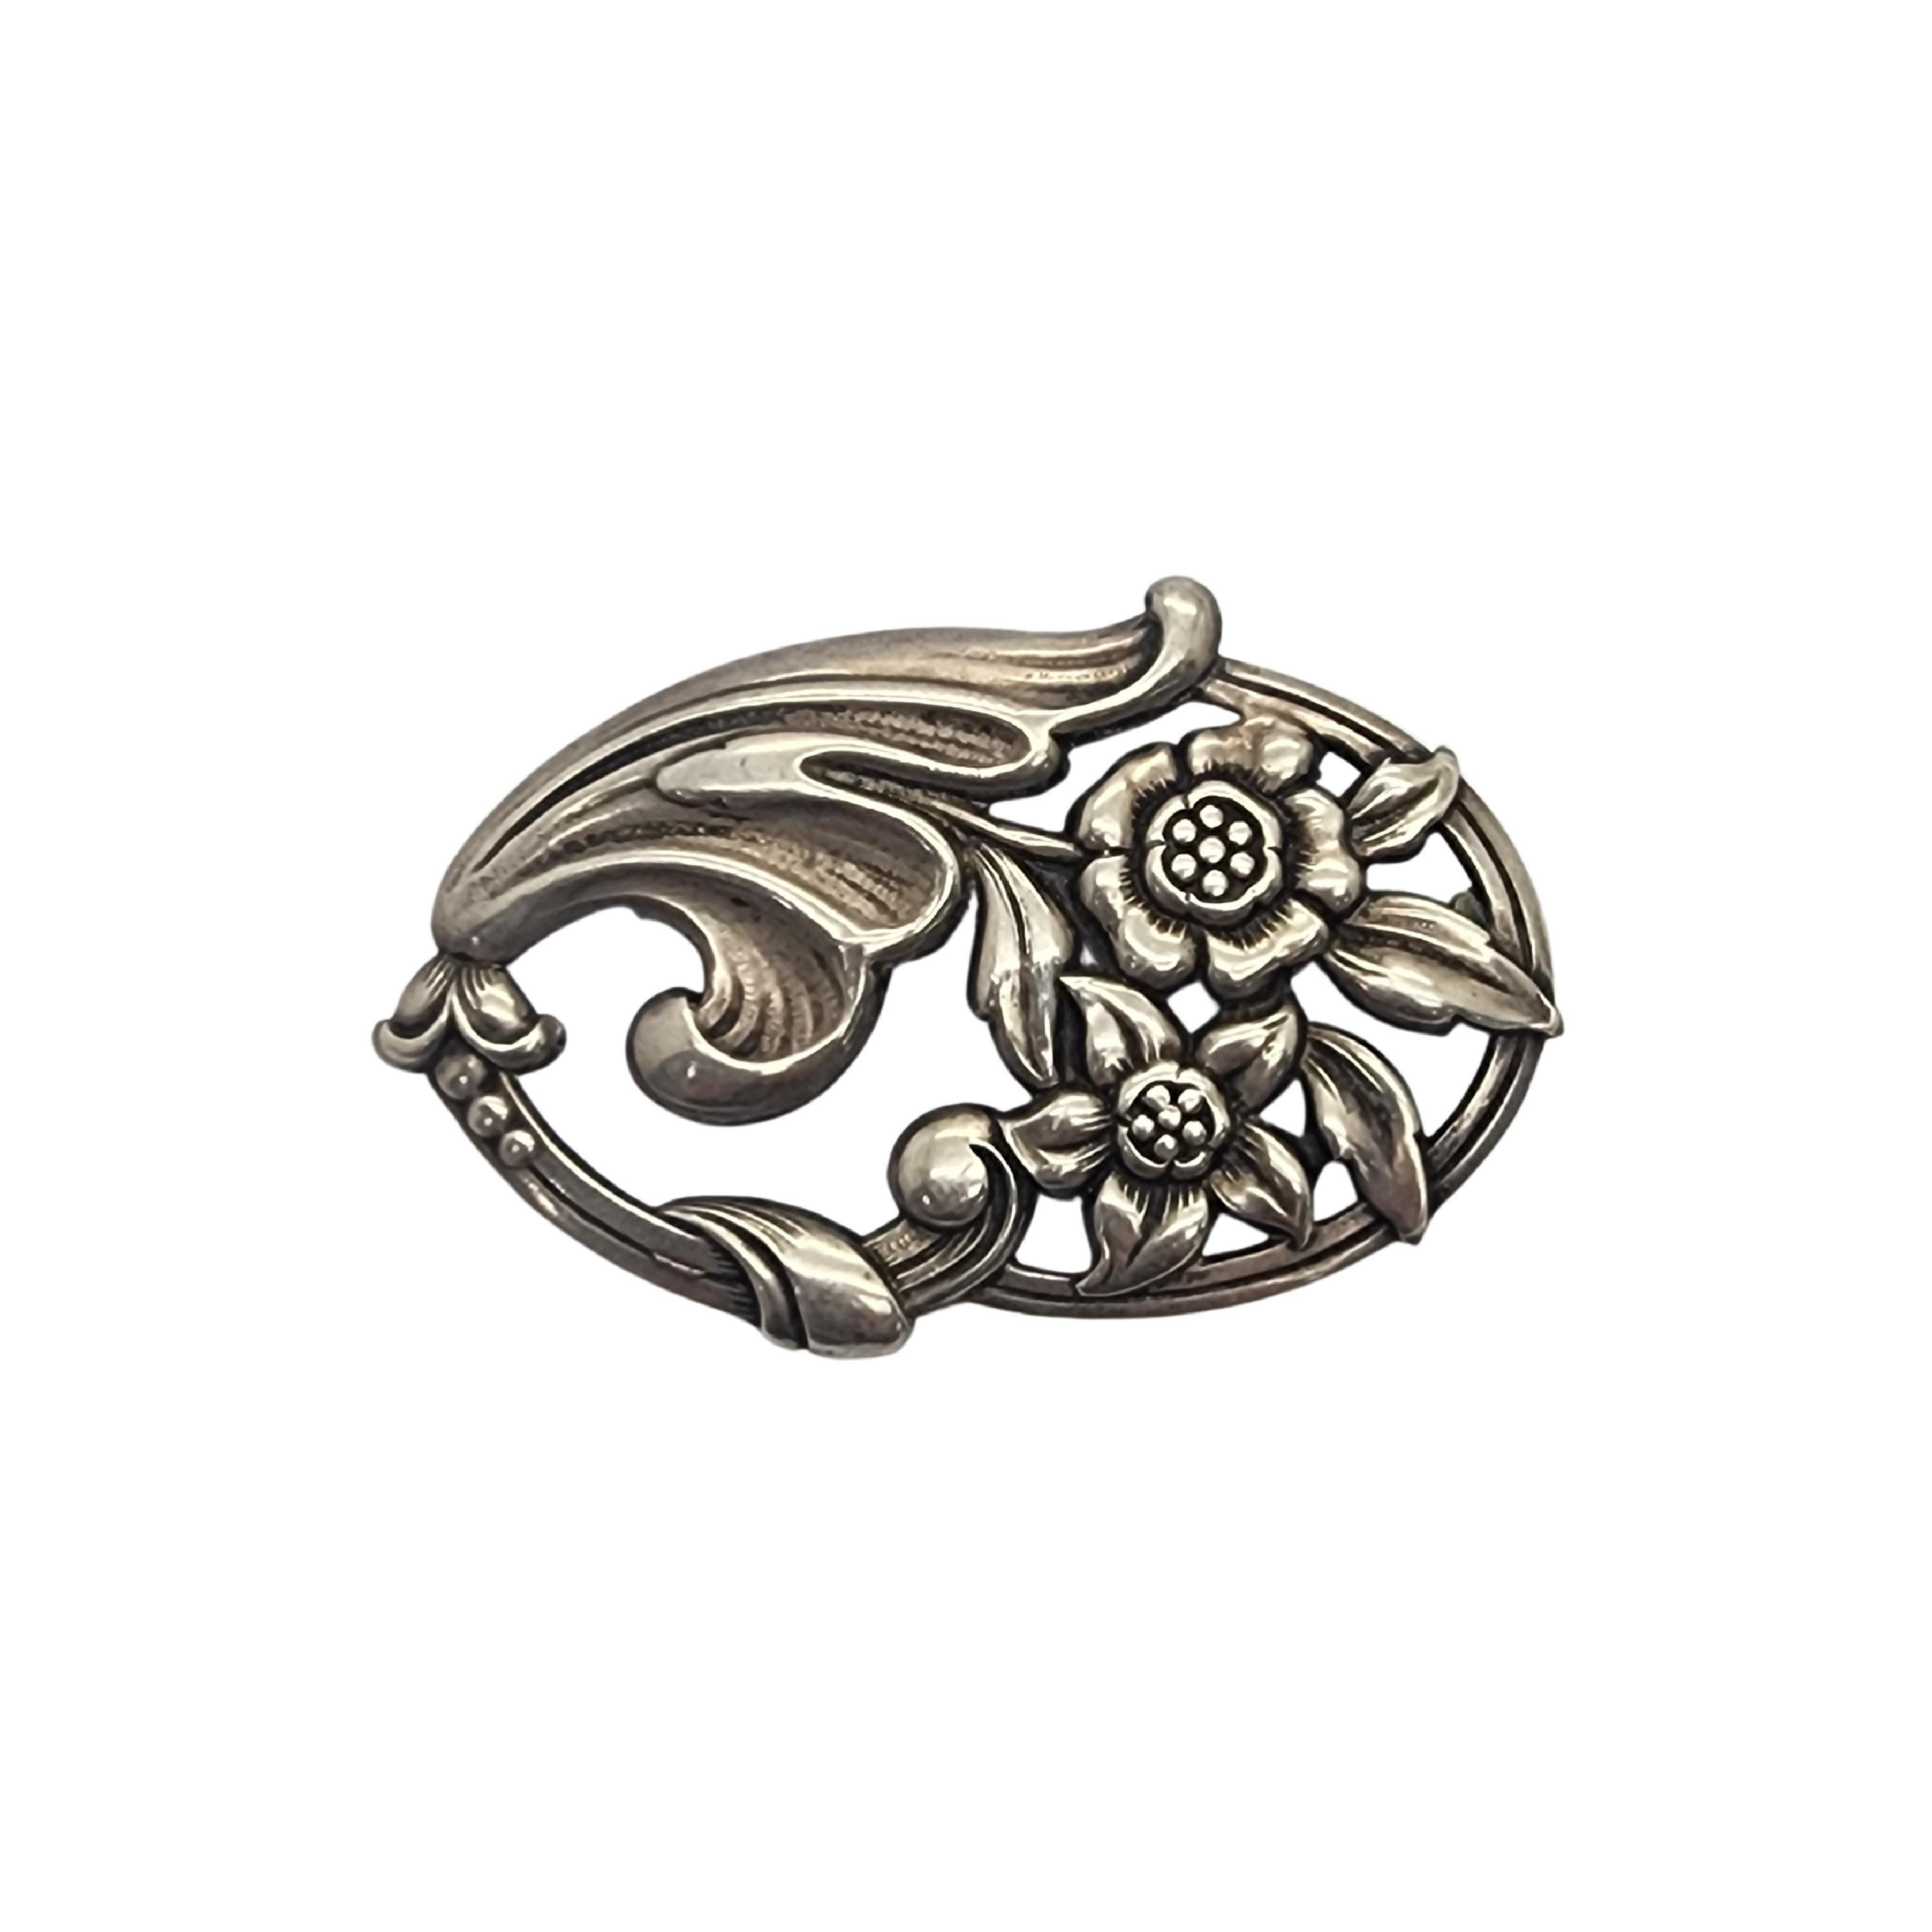  sterling silver oval flower pin/brooch by Norseland for Coro.

Norseland is Coro's highest end line of jewelry. This pin features flowers and leaves in an oval frame with berry accents. 

Measures approx 2 1/2